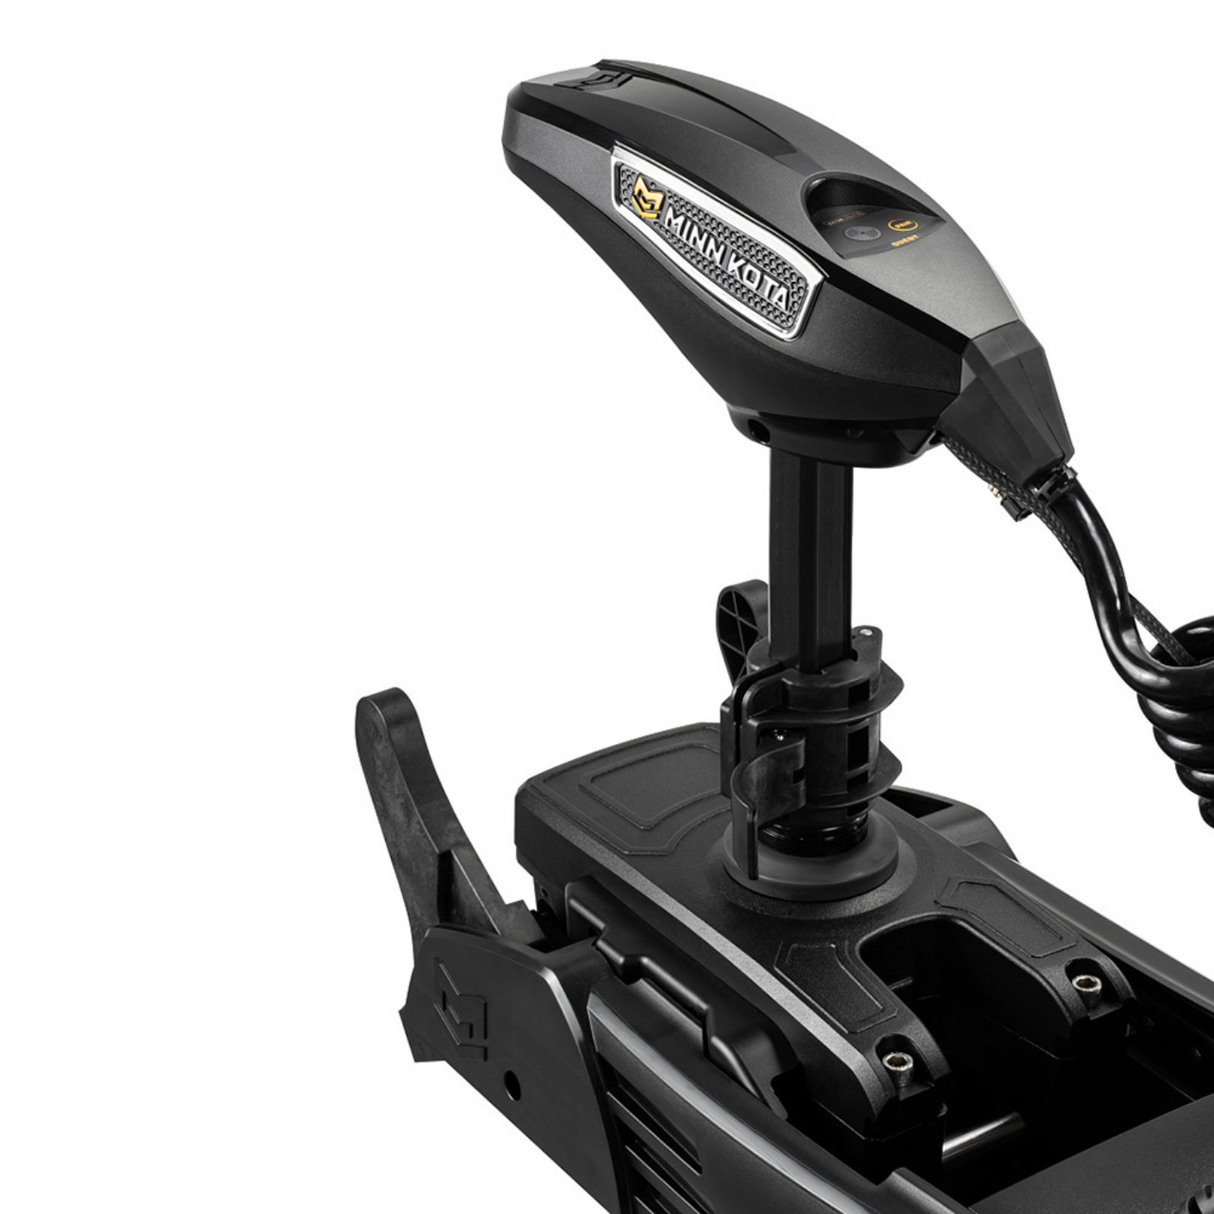 Terrova® Quest™ 90/115 Trolling Motor with Wireless Remote - Dual Spectrum CHIRP - 72 in.